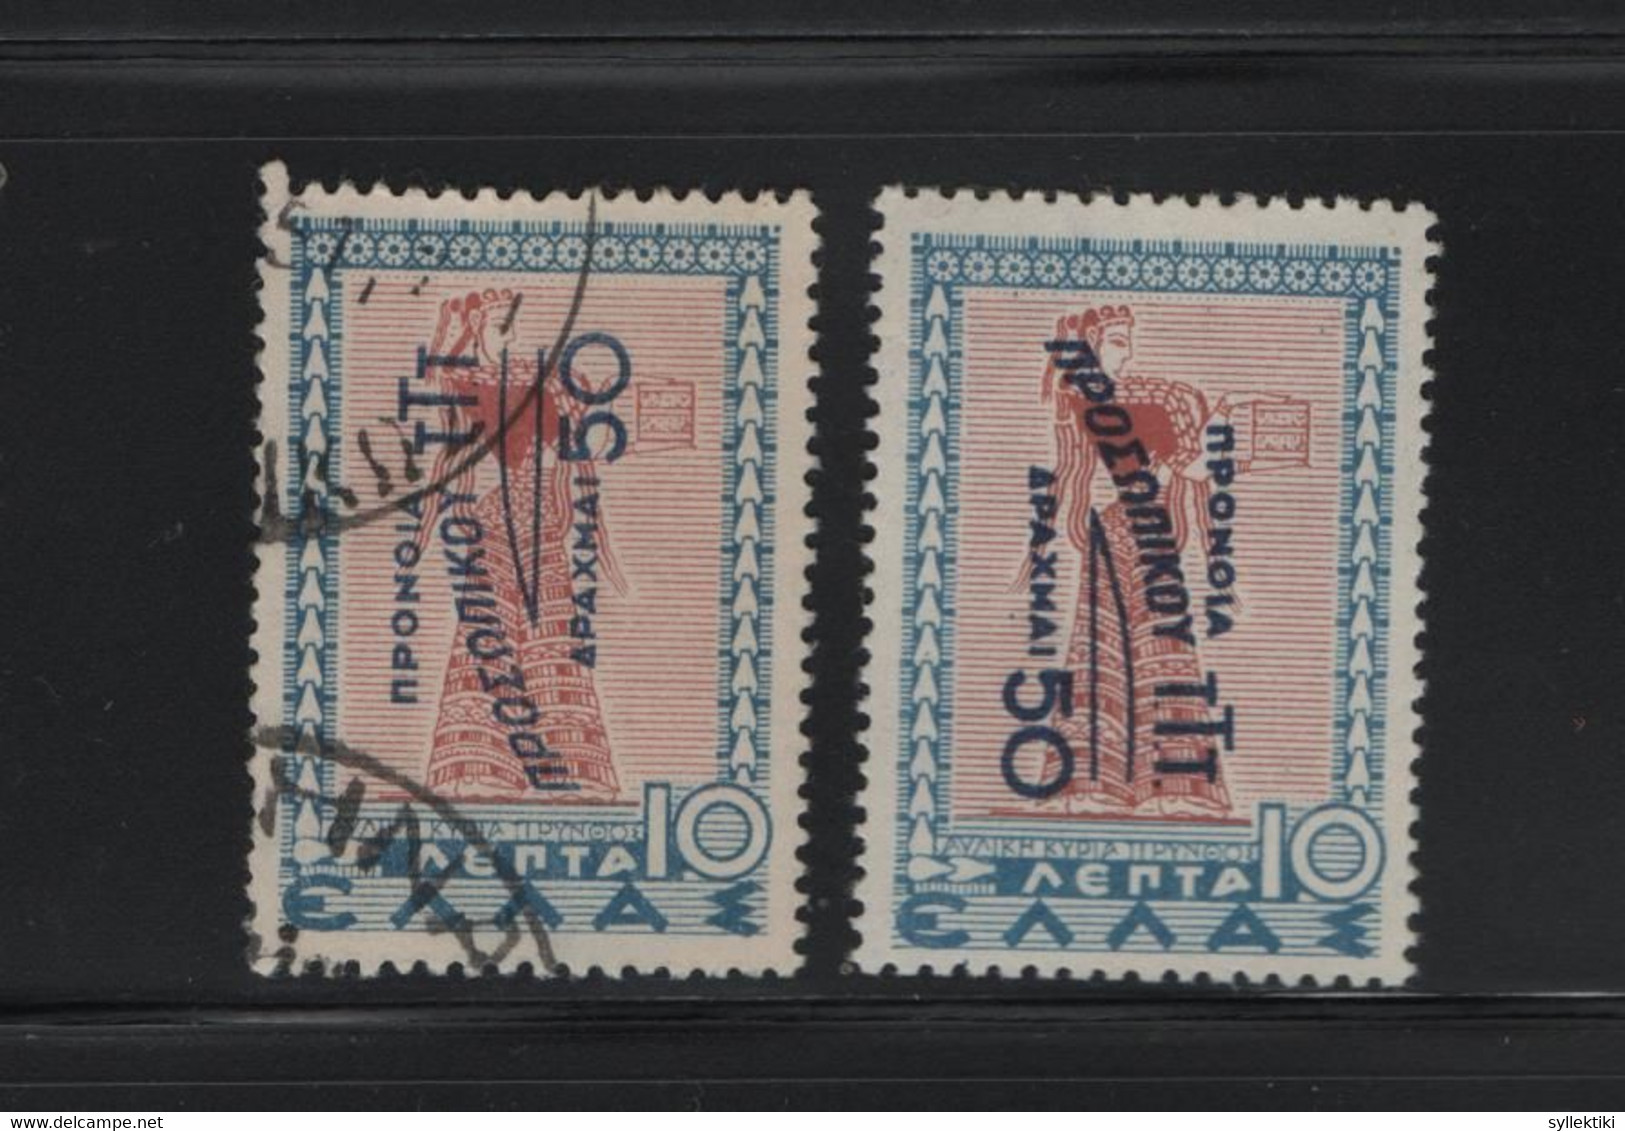 GREECE 1946/50 50 DR / 10 L CHARITY REVERSED OVERPRINT NO GUM STAMP - Charity Issues